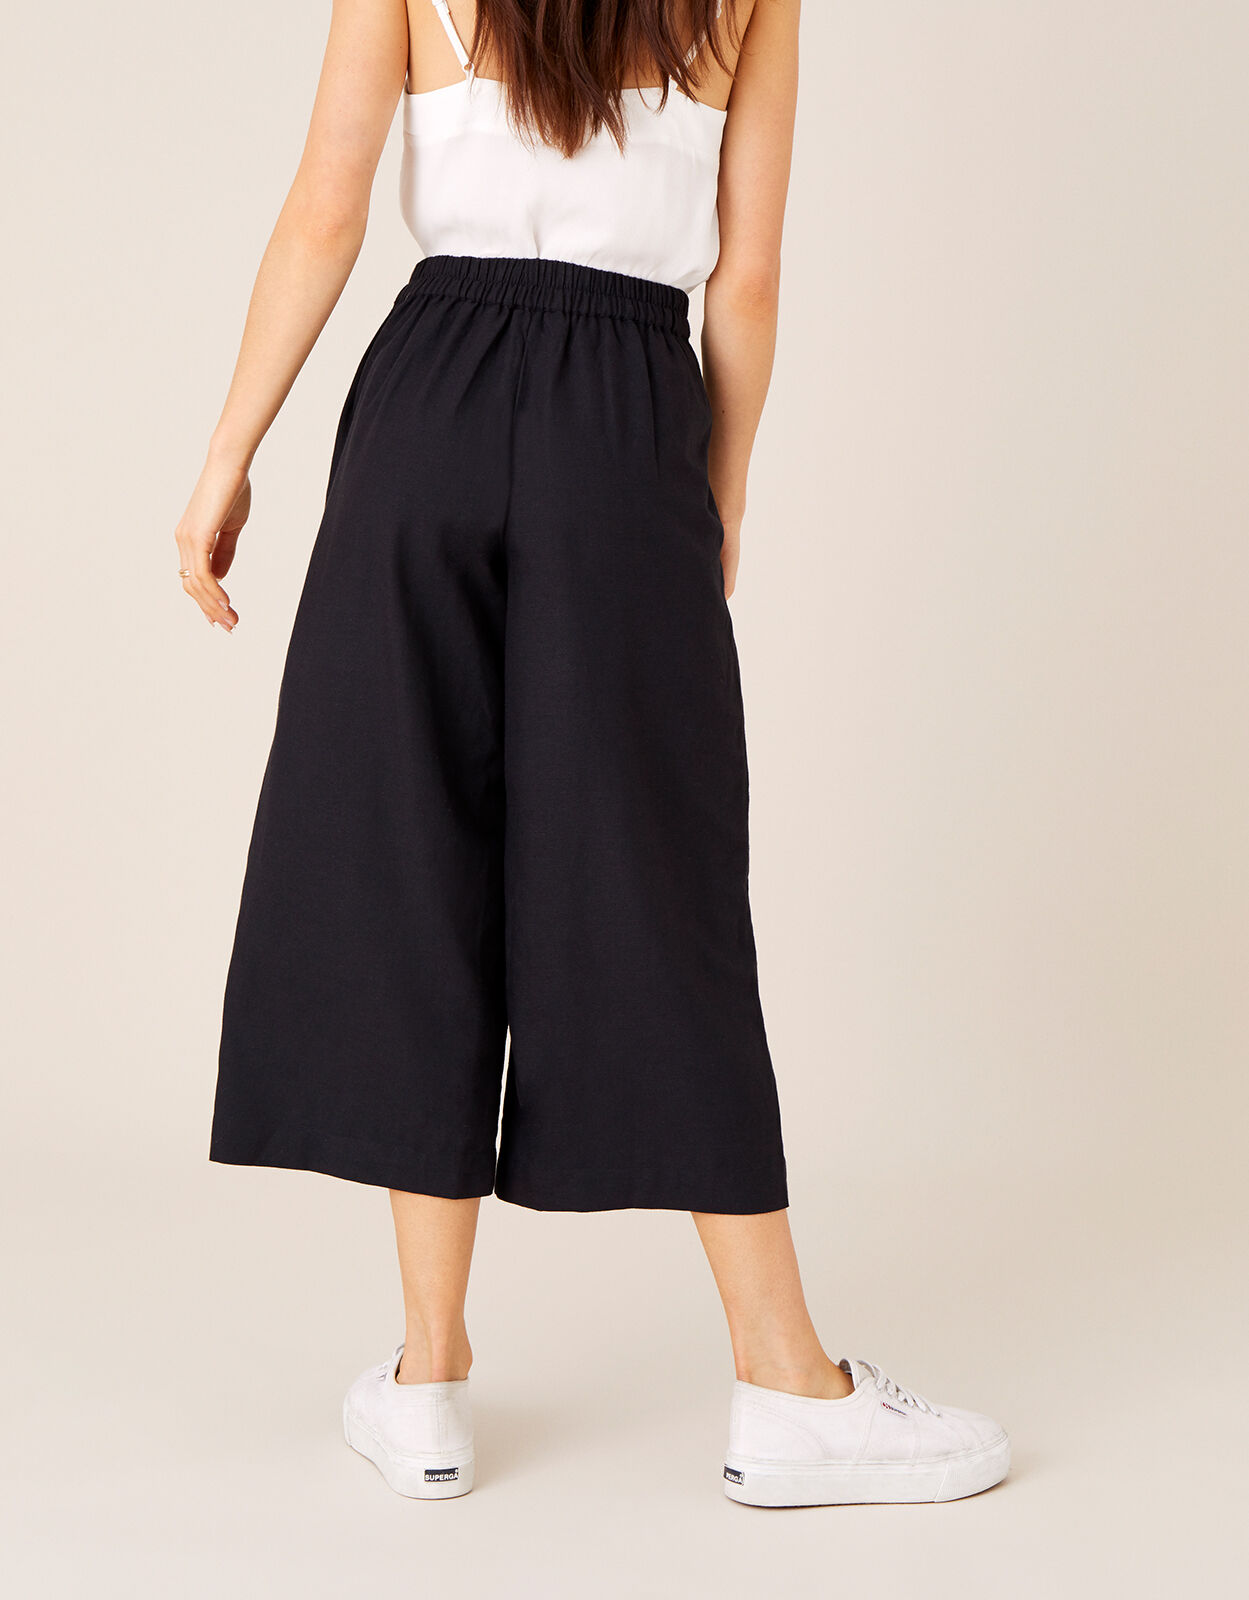 Womens High Waisted Buckle Belted Culotte Trousers - Beige - 12, Beige |  £8.00 | Closer